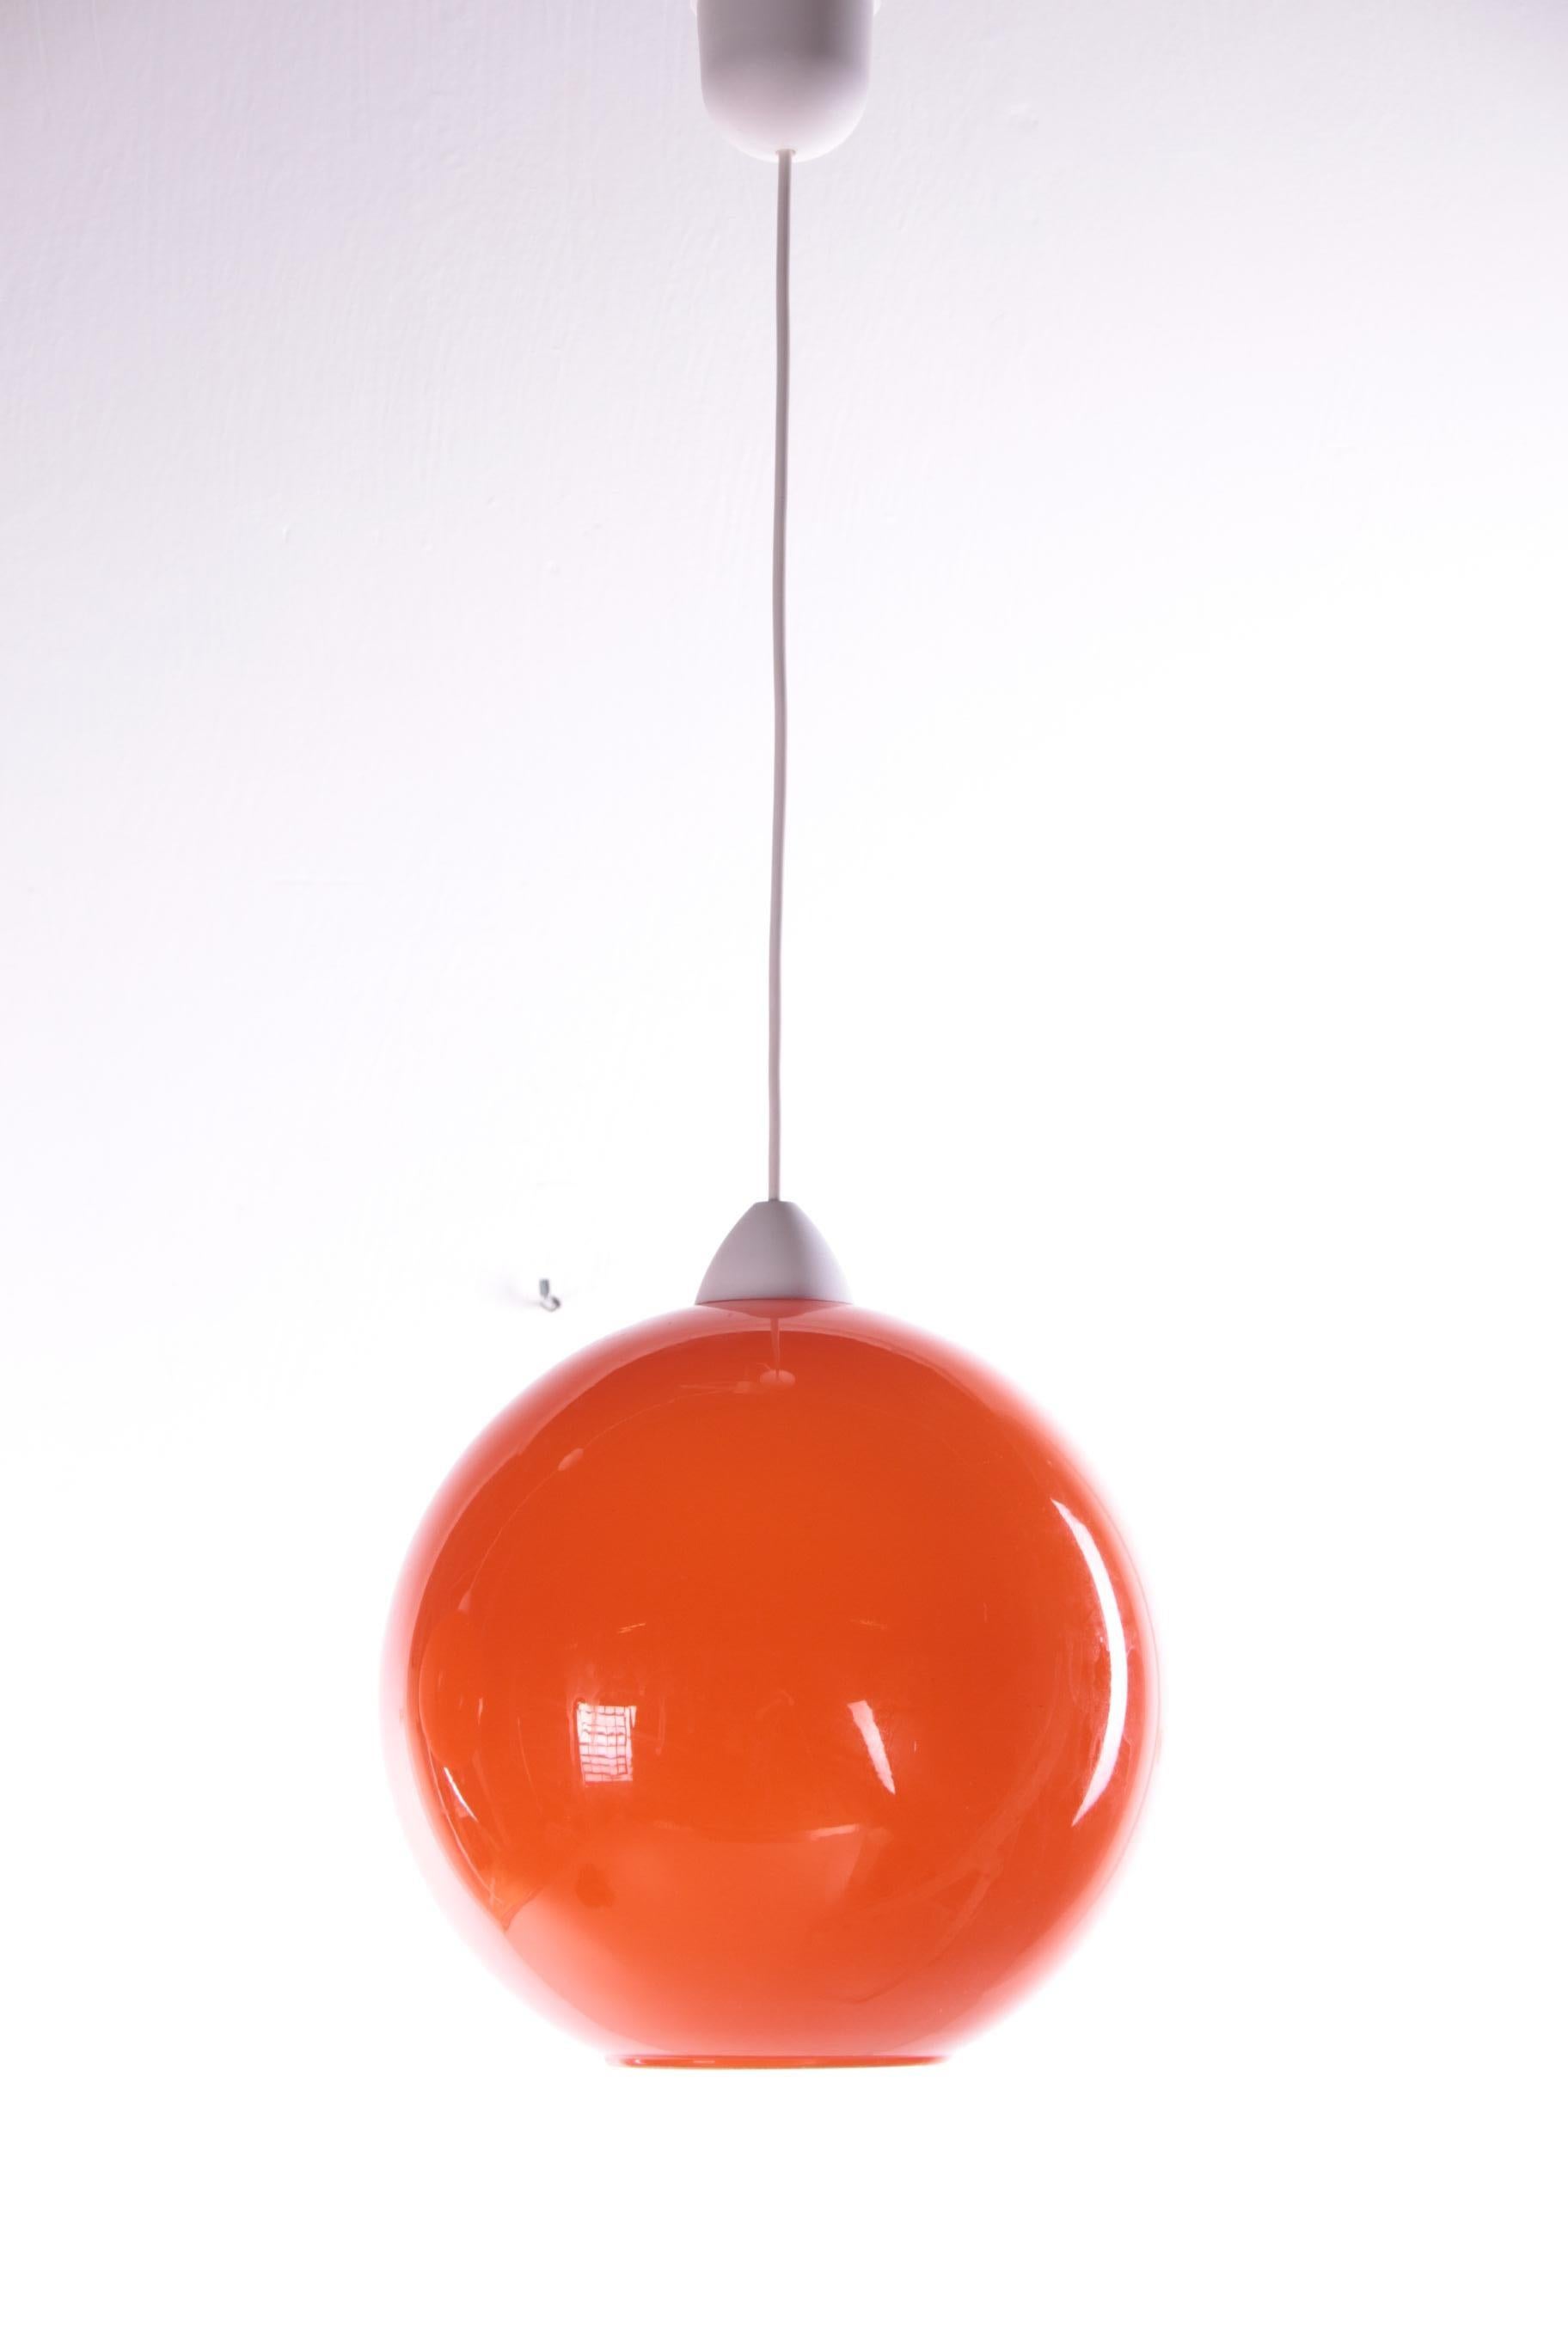 Mid-Century Modern Hanging Lamp Model ui by Vistosi, Design by Alessandro Pianon 1960s